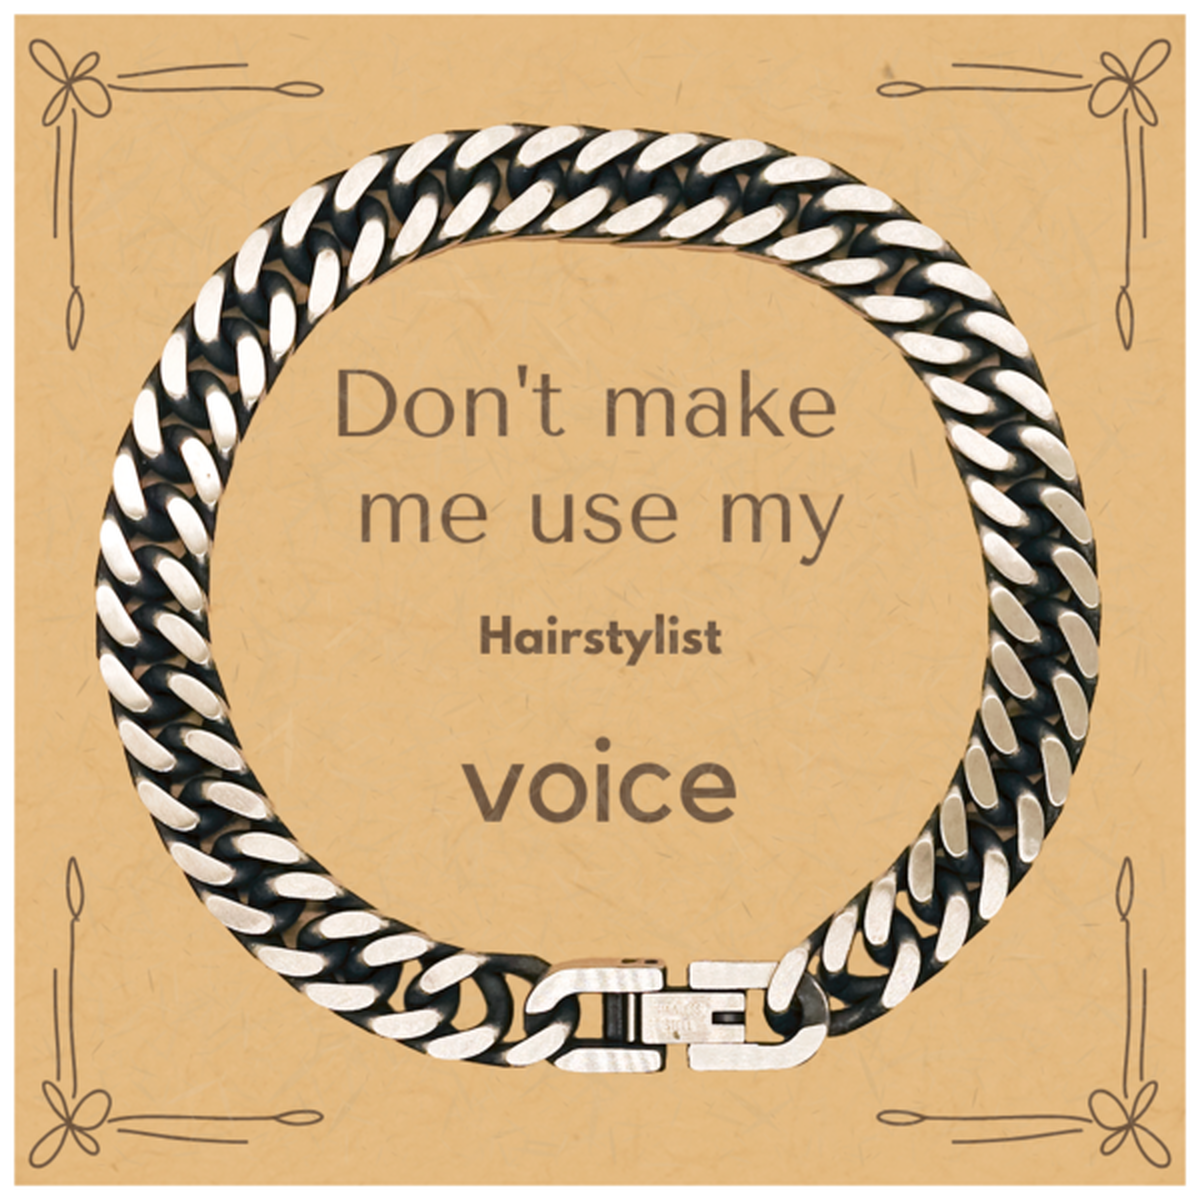 Don't make me use my Hairstylist voice, Sarcasm Hairstylist Card Gifts, Christmas Hairstylist Cuban Link Chain Bracelet Birthday Unique Gifts For Hairstylist Coworkers, Men, Women, Colleague, Friends